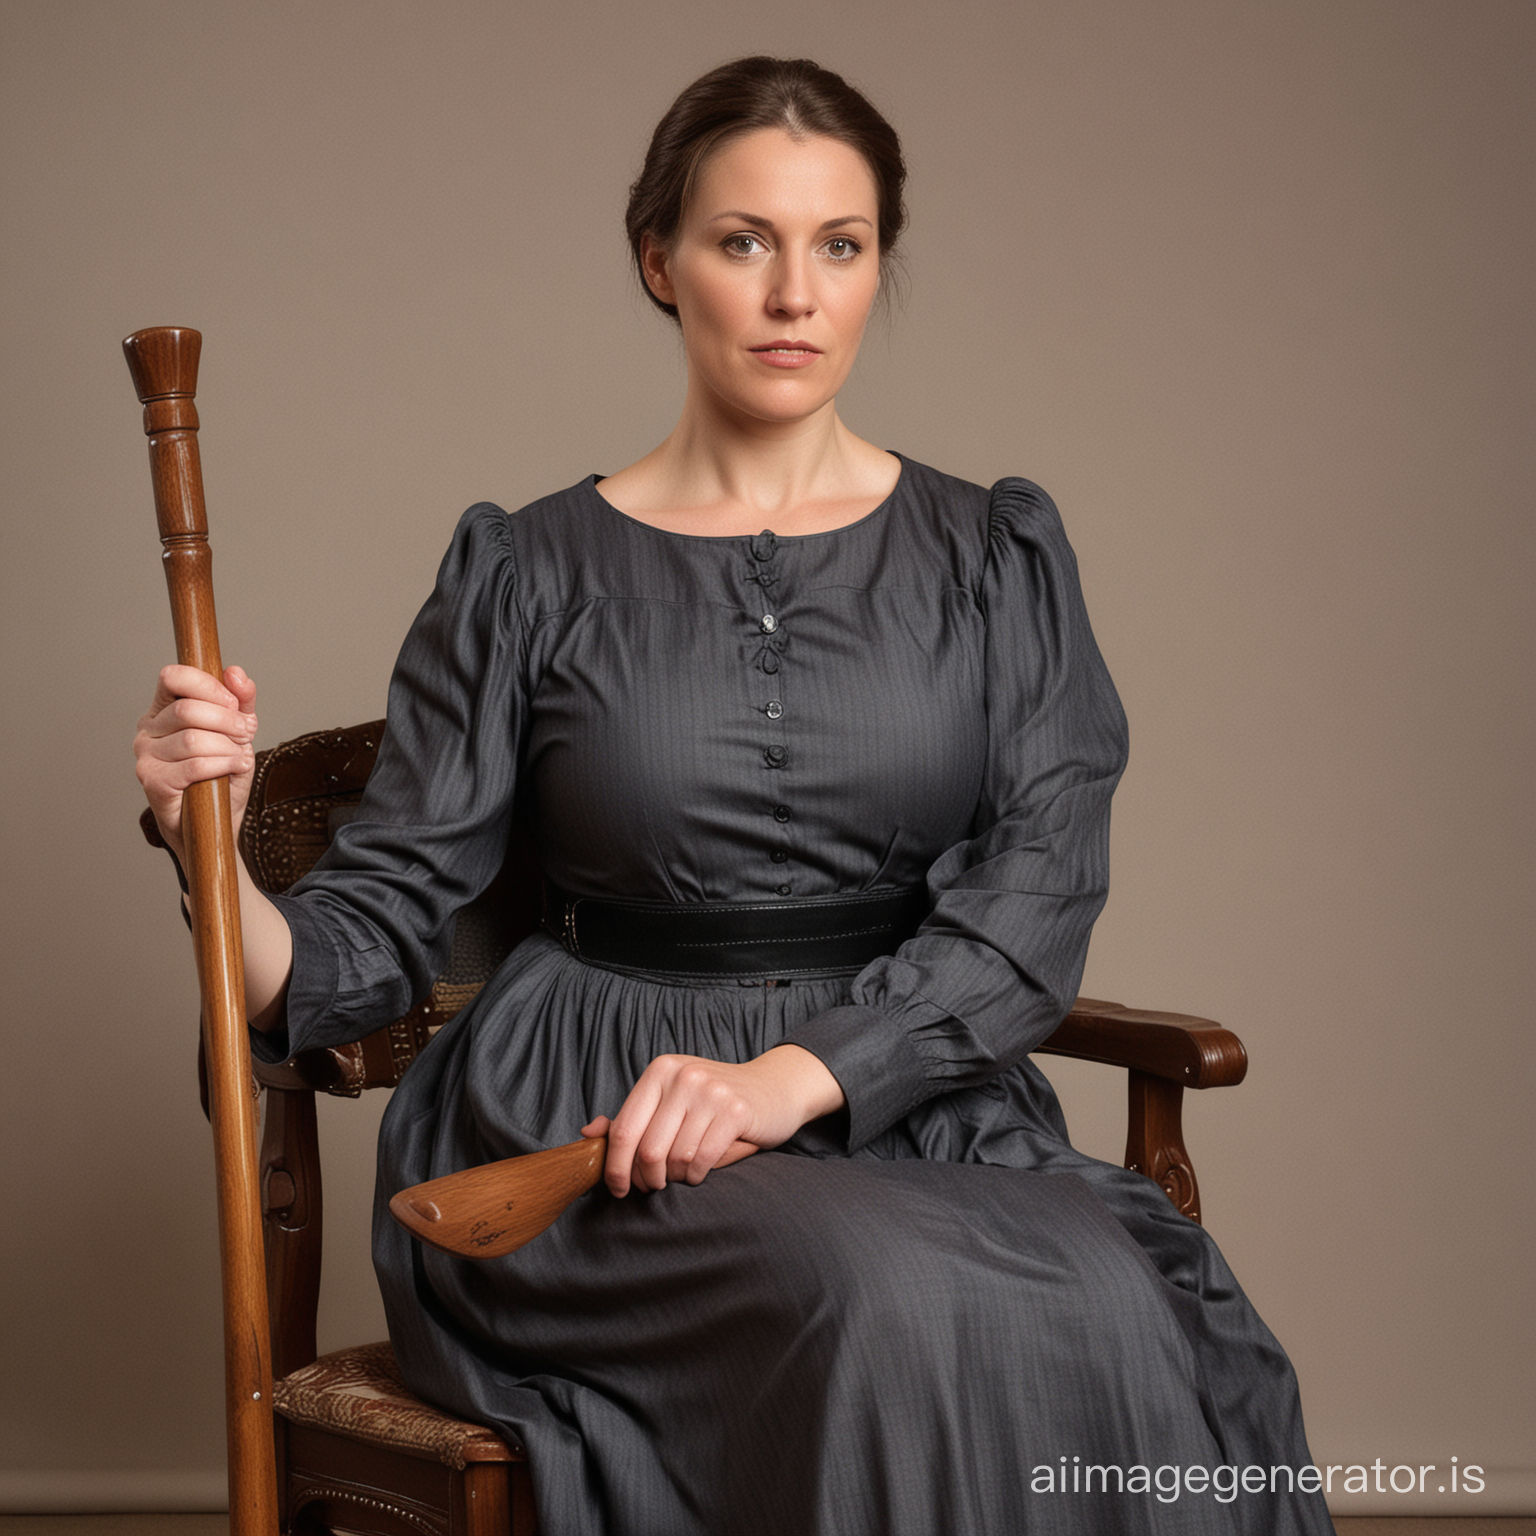 very strong german governess, 40 years old, sitting on armless chair, strong curvy figure, very strong upper arms, vey wide hips, tight long dress, legs beneath each other, angry face, strictly looking at you, broad lap, hands on lap, waiting for you, holding a spanking paddle in right hand, full size